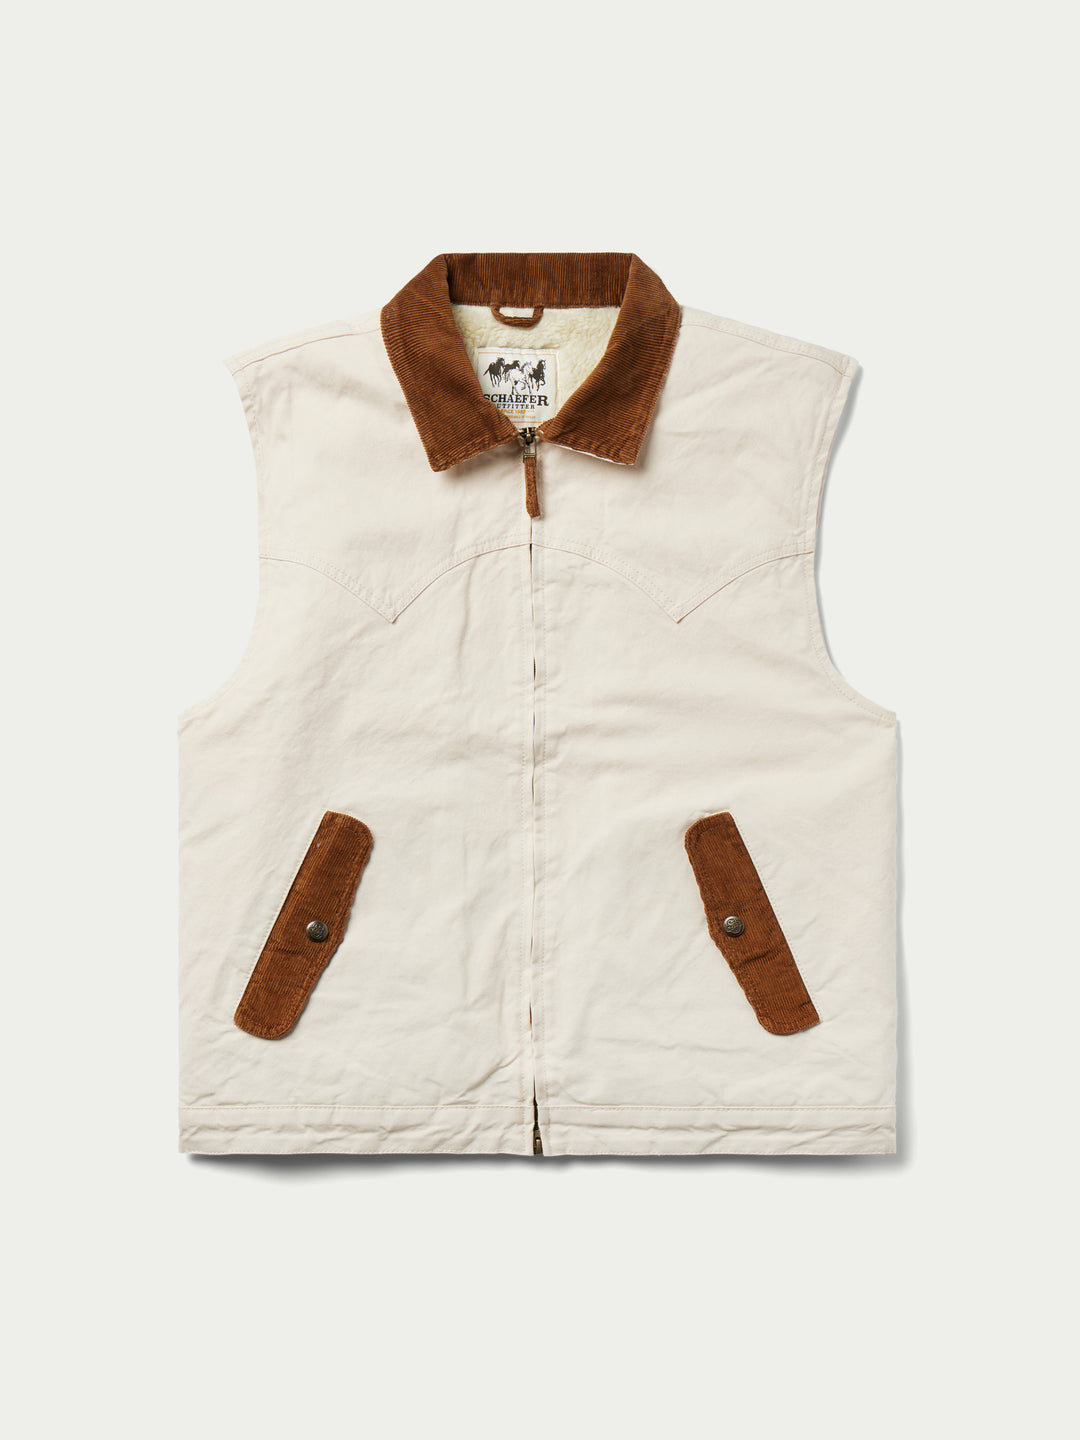 Zip Canvas Vest with Sherpa Lining - Schaefer Outfitter